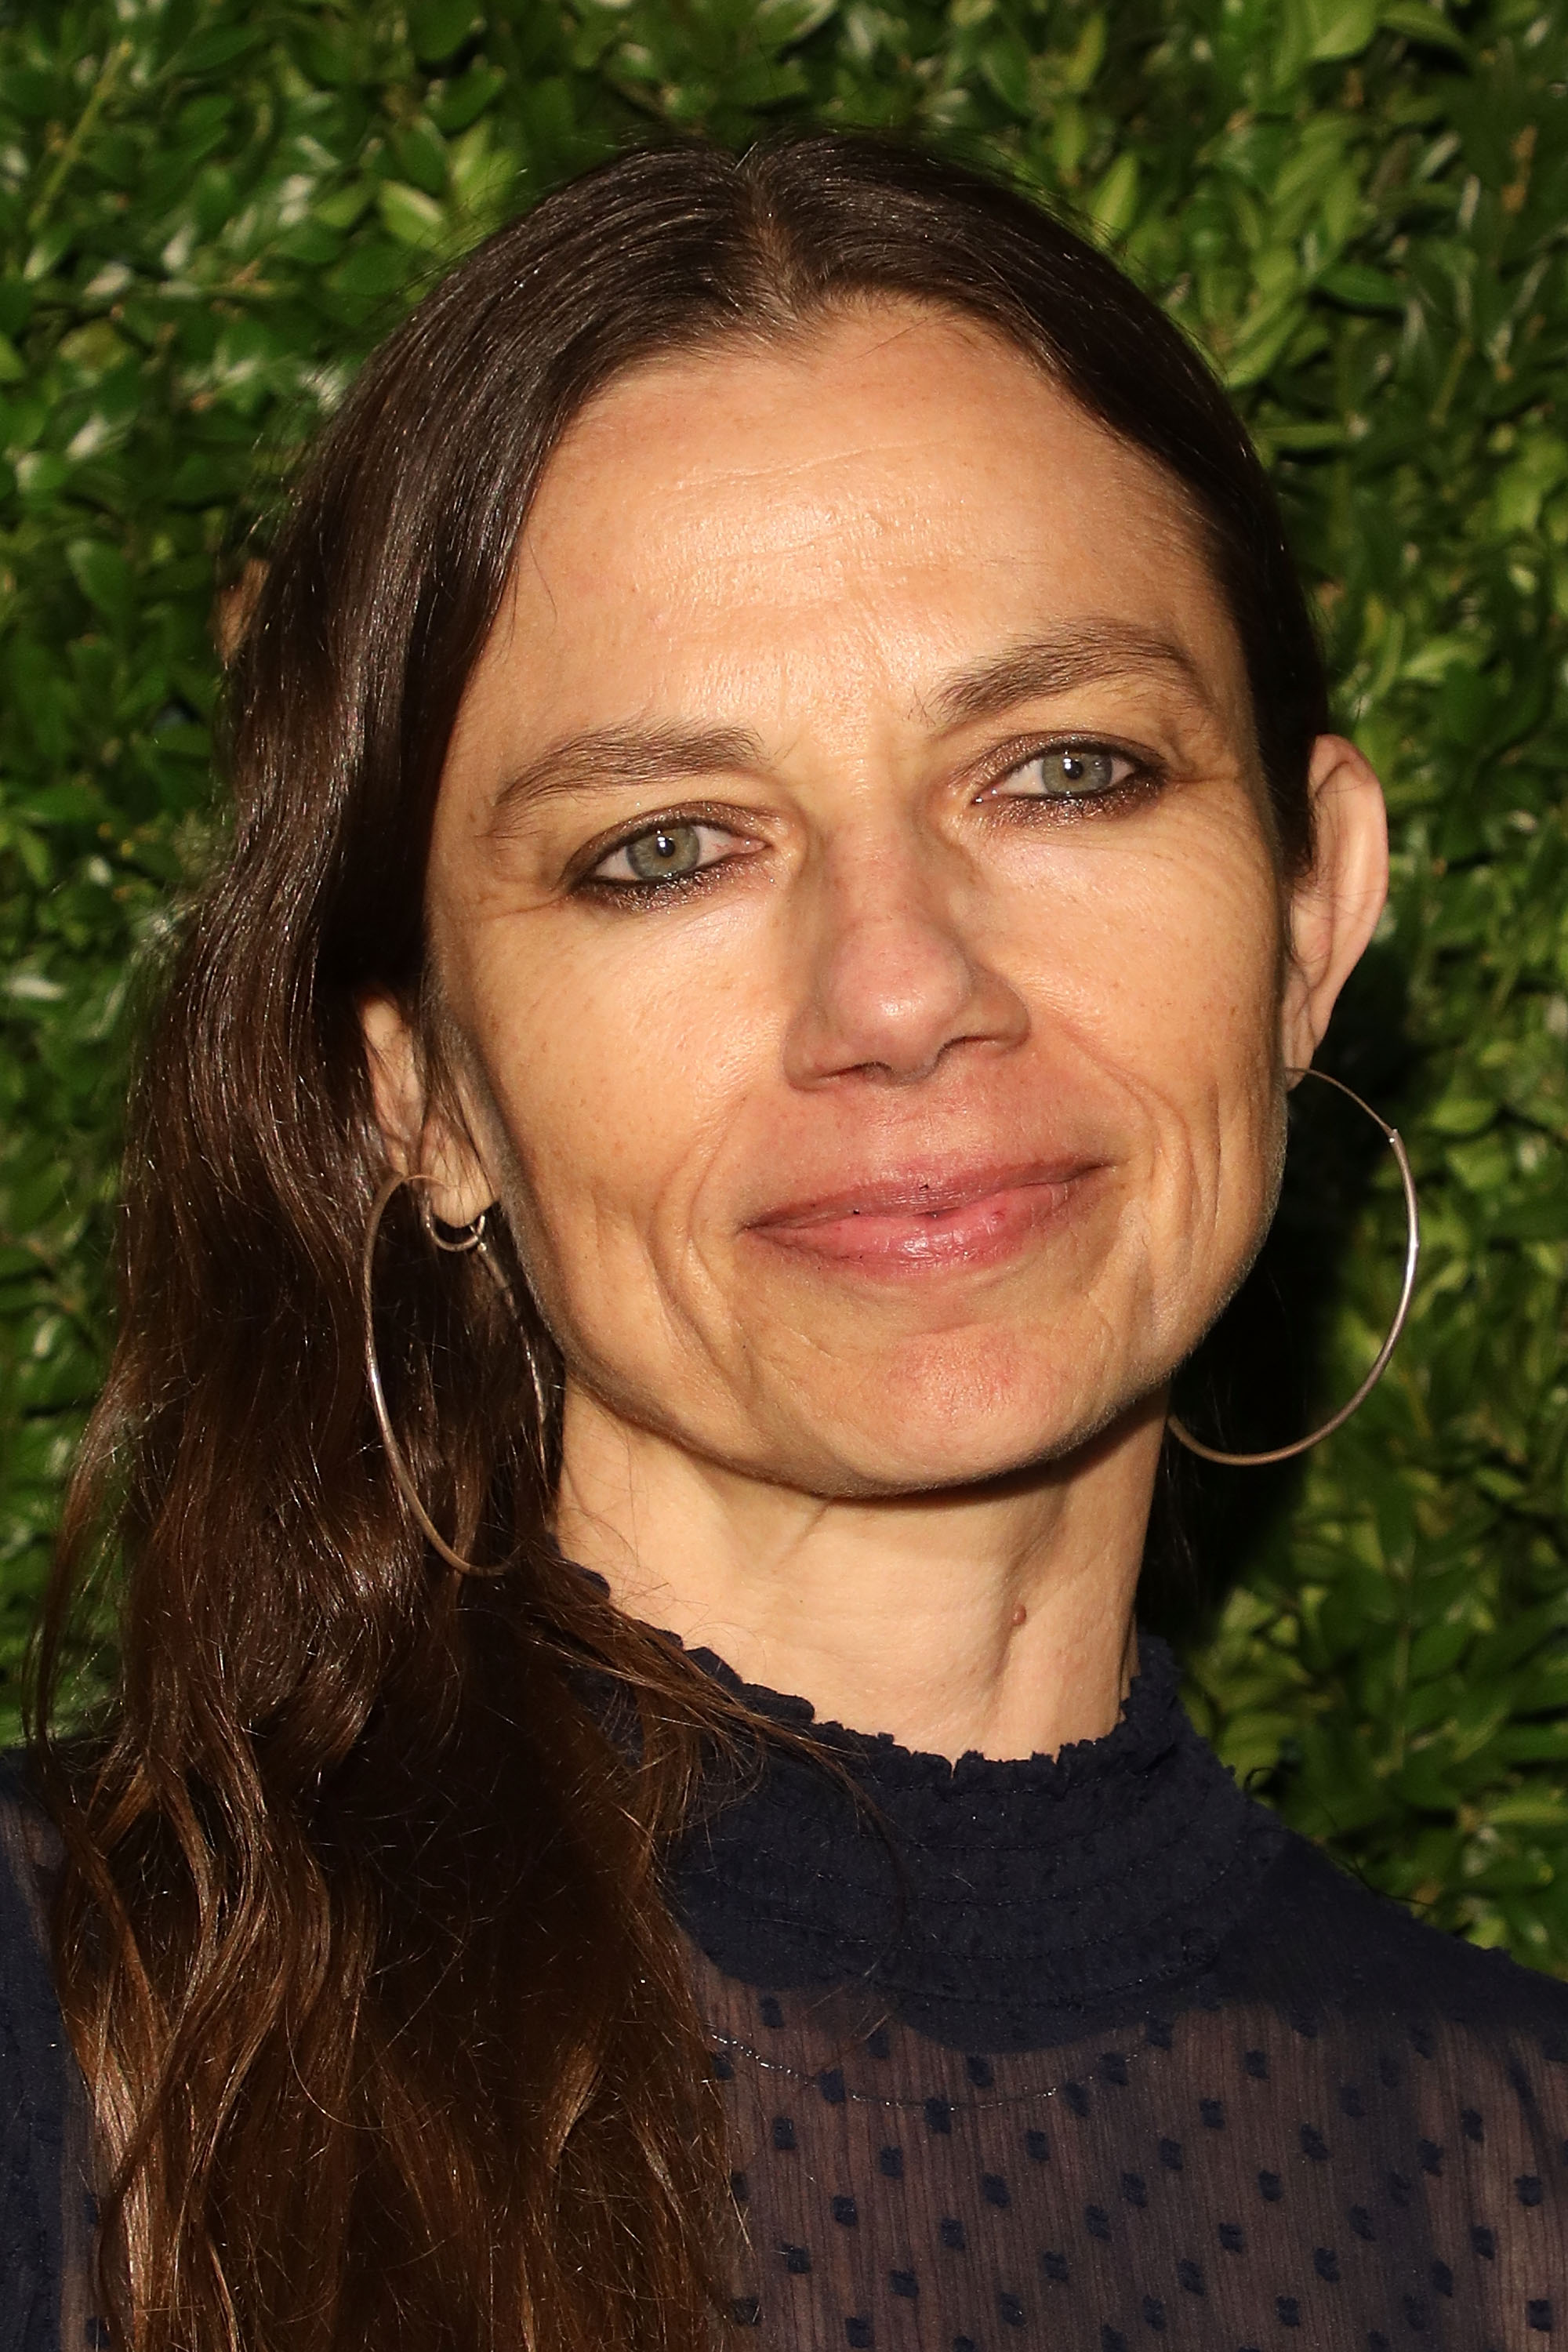 Justine Bateman attends the 13th Annual Tribeca Film Festival on April 23, 2018 in New York City | Source: Getty Images